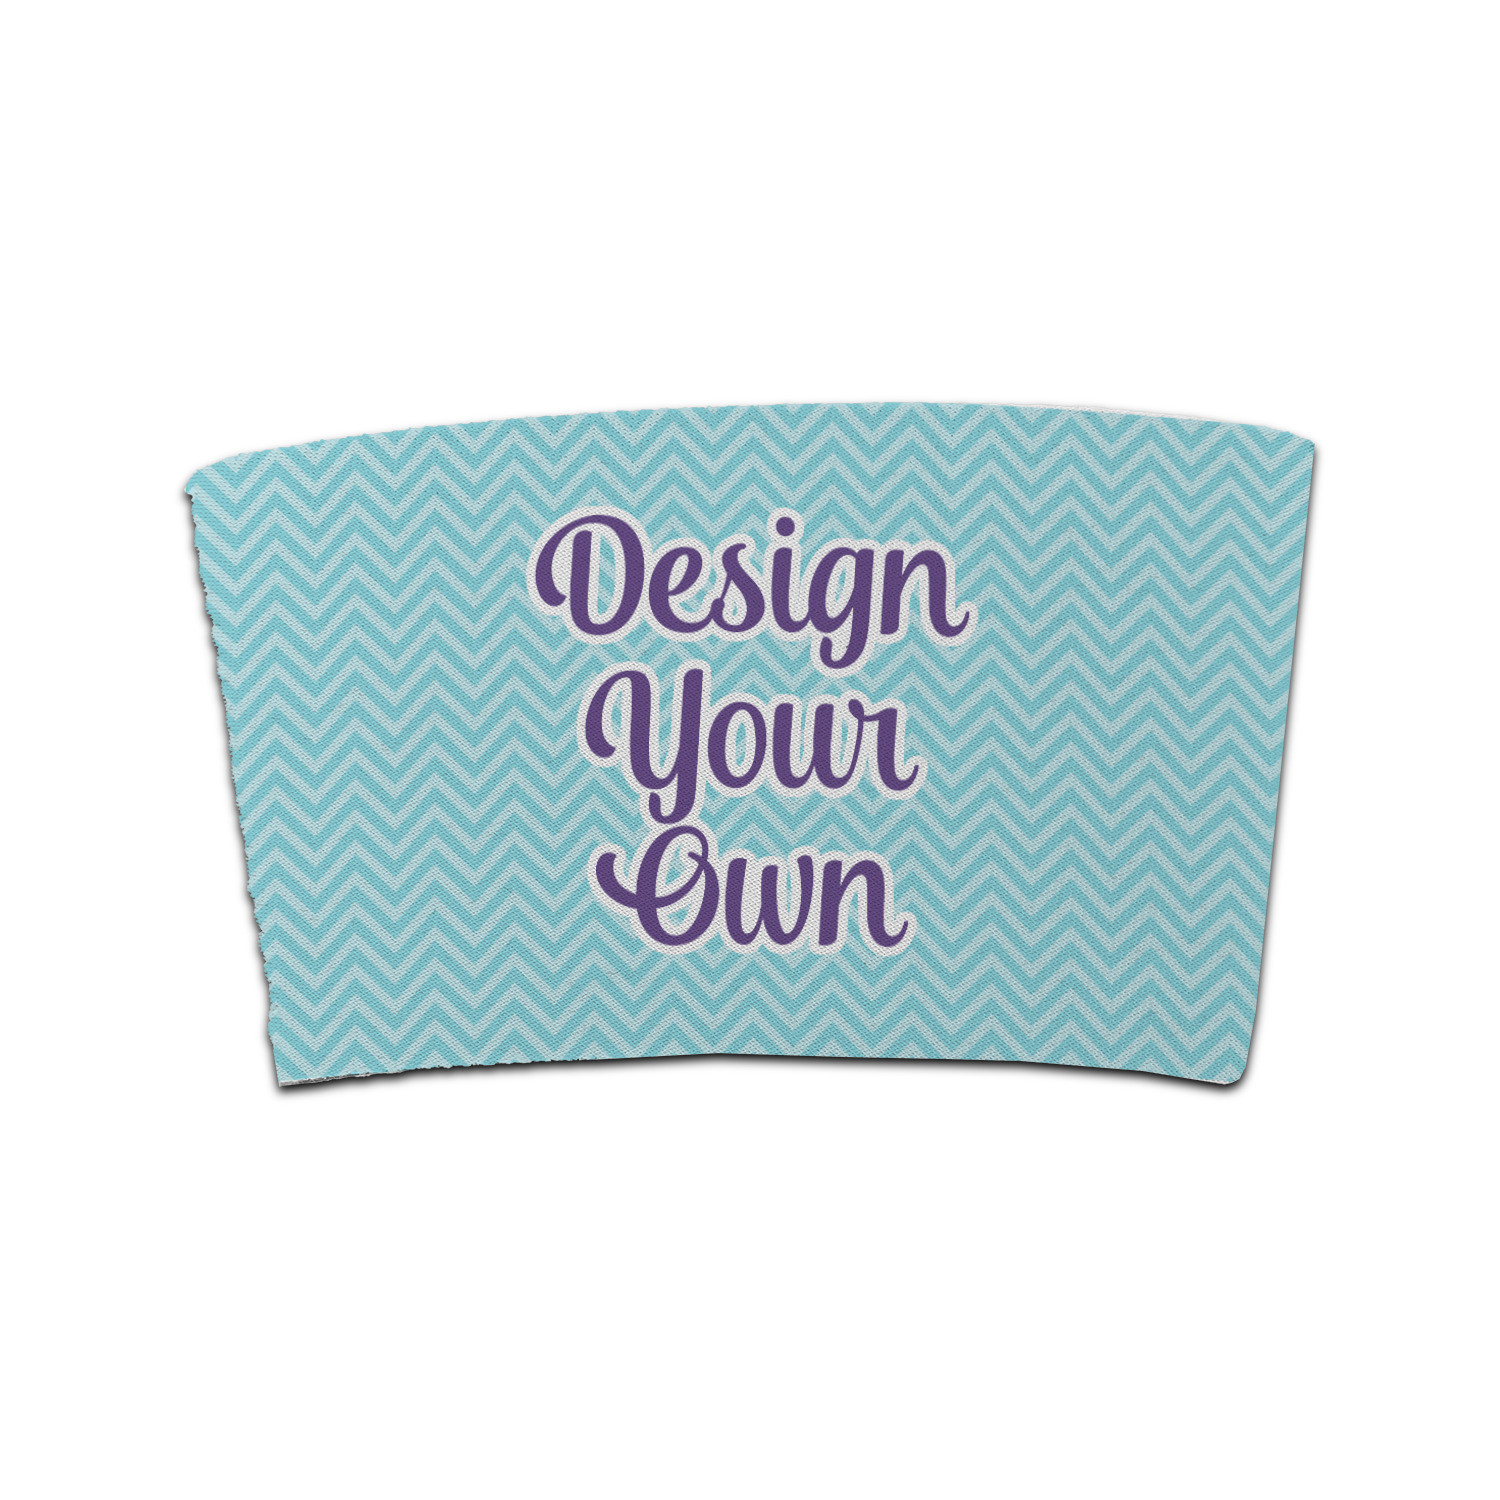 https://www.youcustomizeit.com/common/MAKE/965833/Design-Your-Own-Coffee-Cup-Sleeve-FRONT.jpg?lm=1641829037